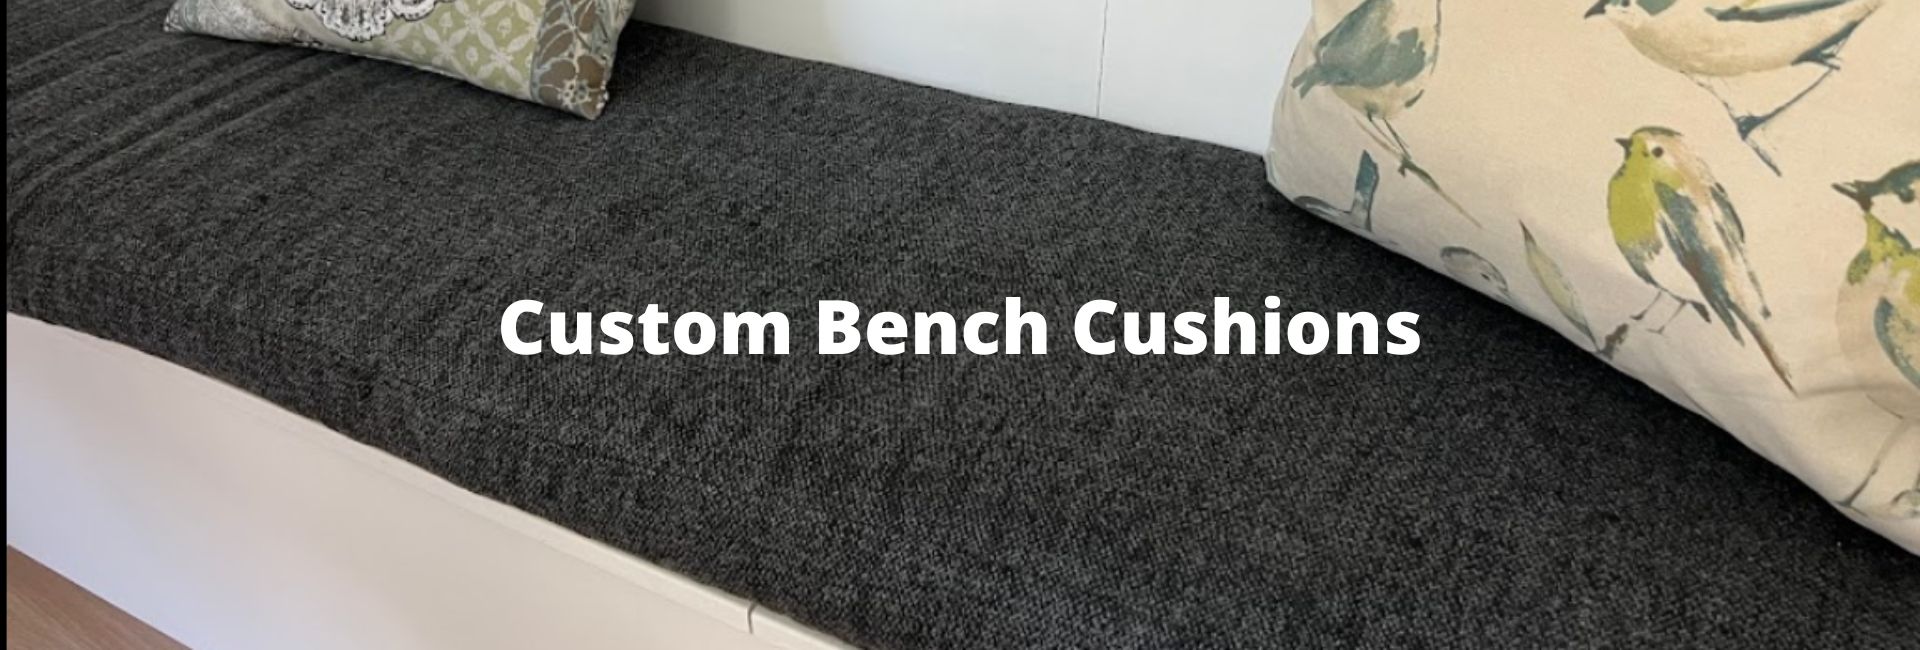 Custom Outdoor Bench Cushions for Your Home or Businesses